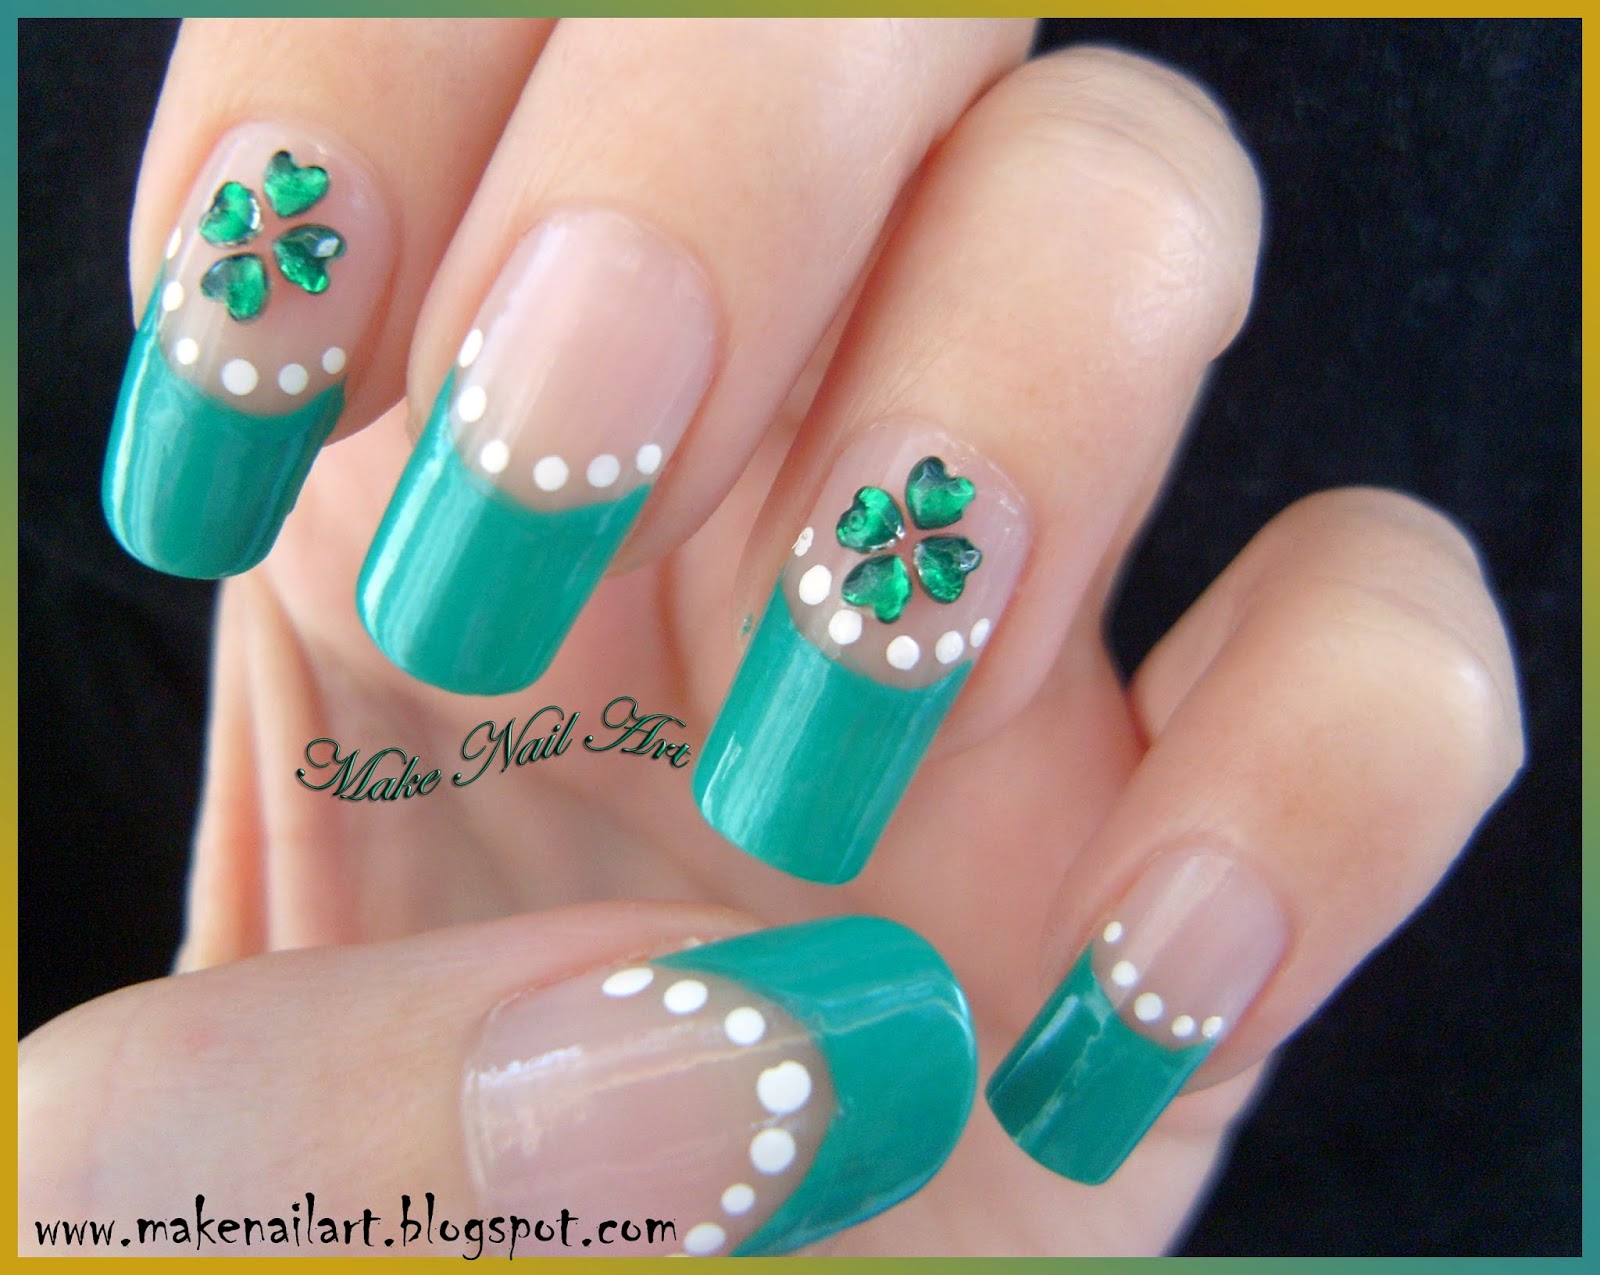 Clover Nail Art for St. Patrick's Day - wide 7